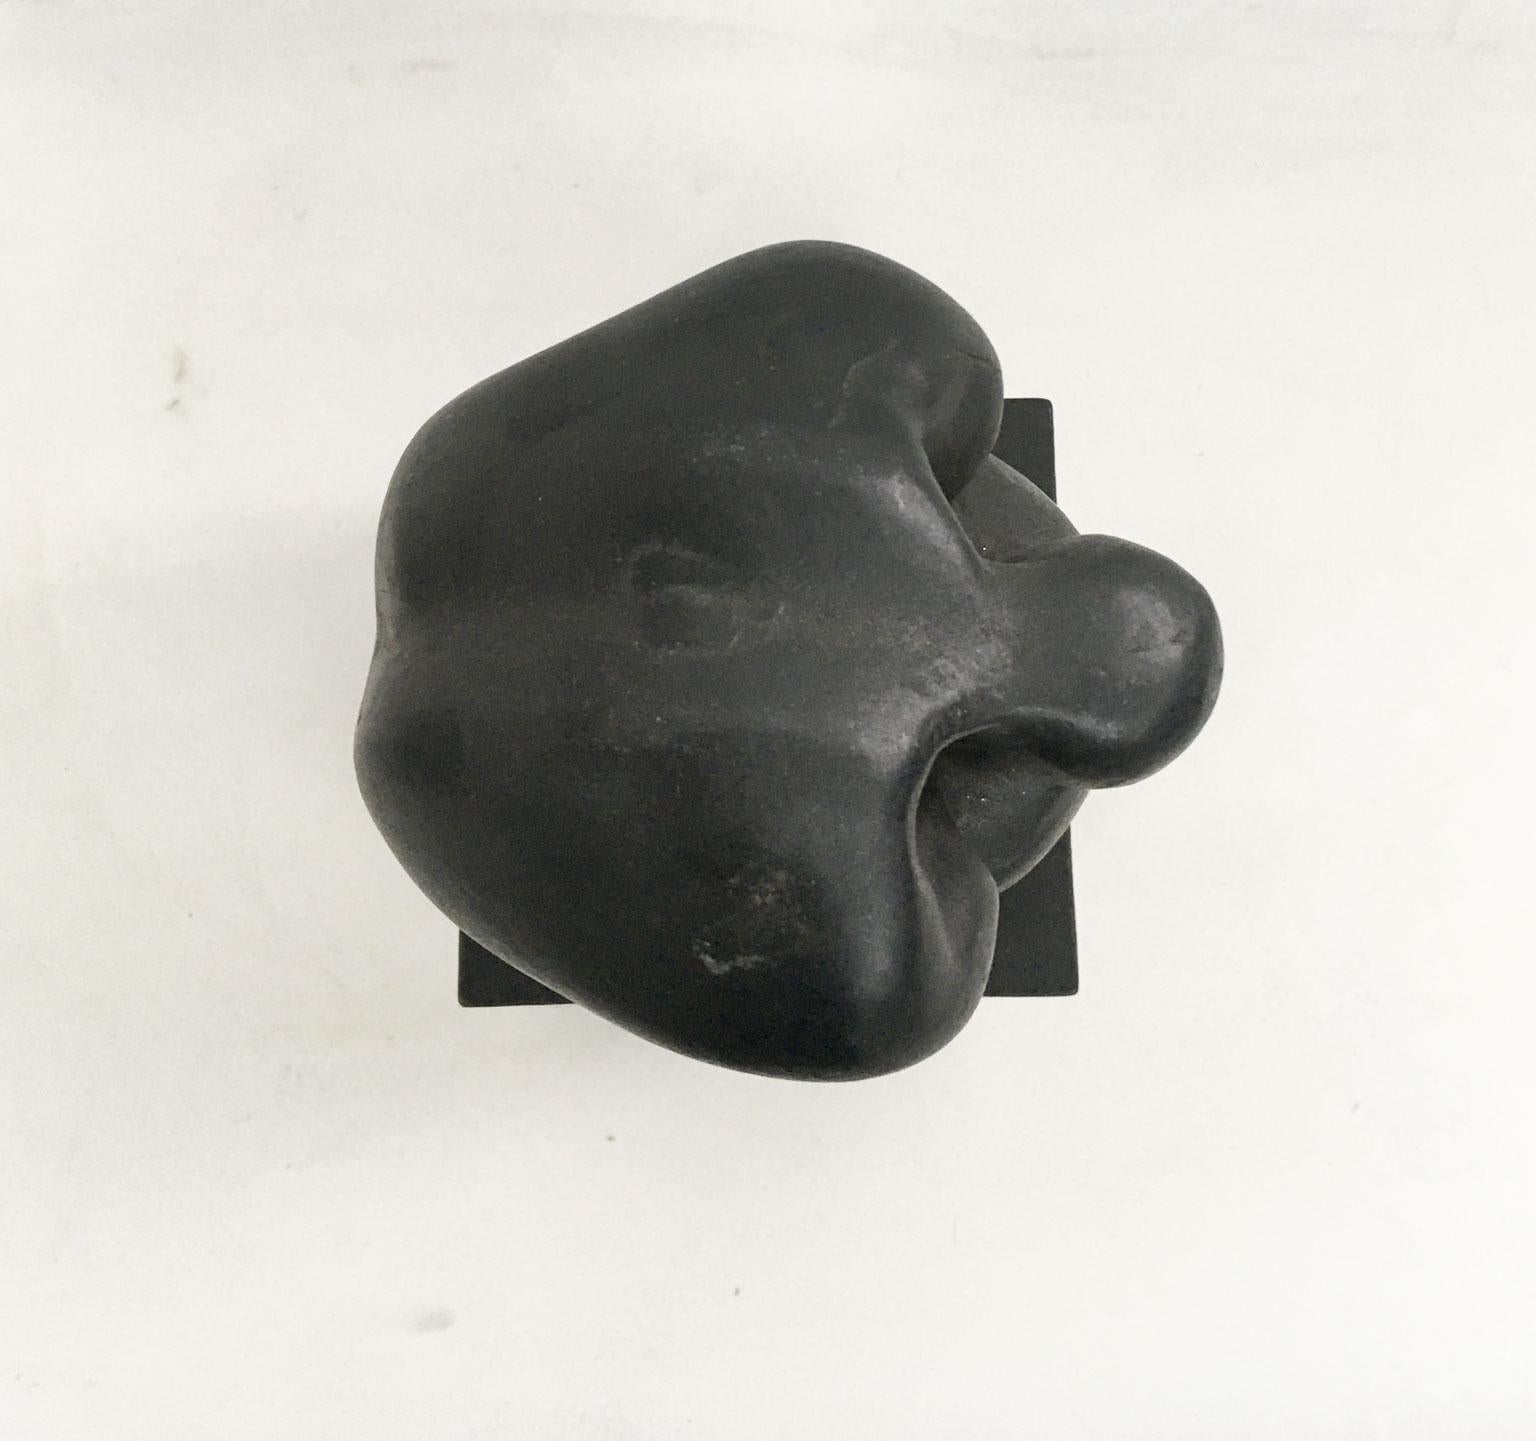 1988 Italy Black Aluminum Abstract Sculpture by Patrizia Guerresi Title Deji For Sale 4